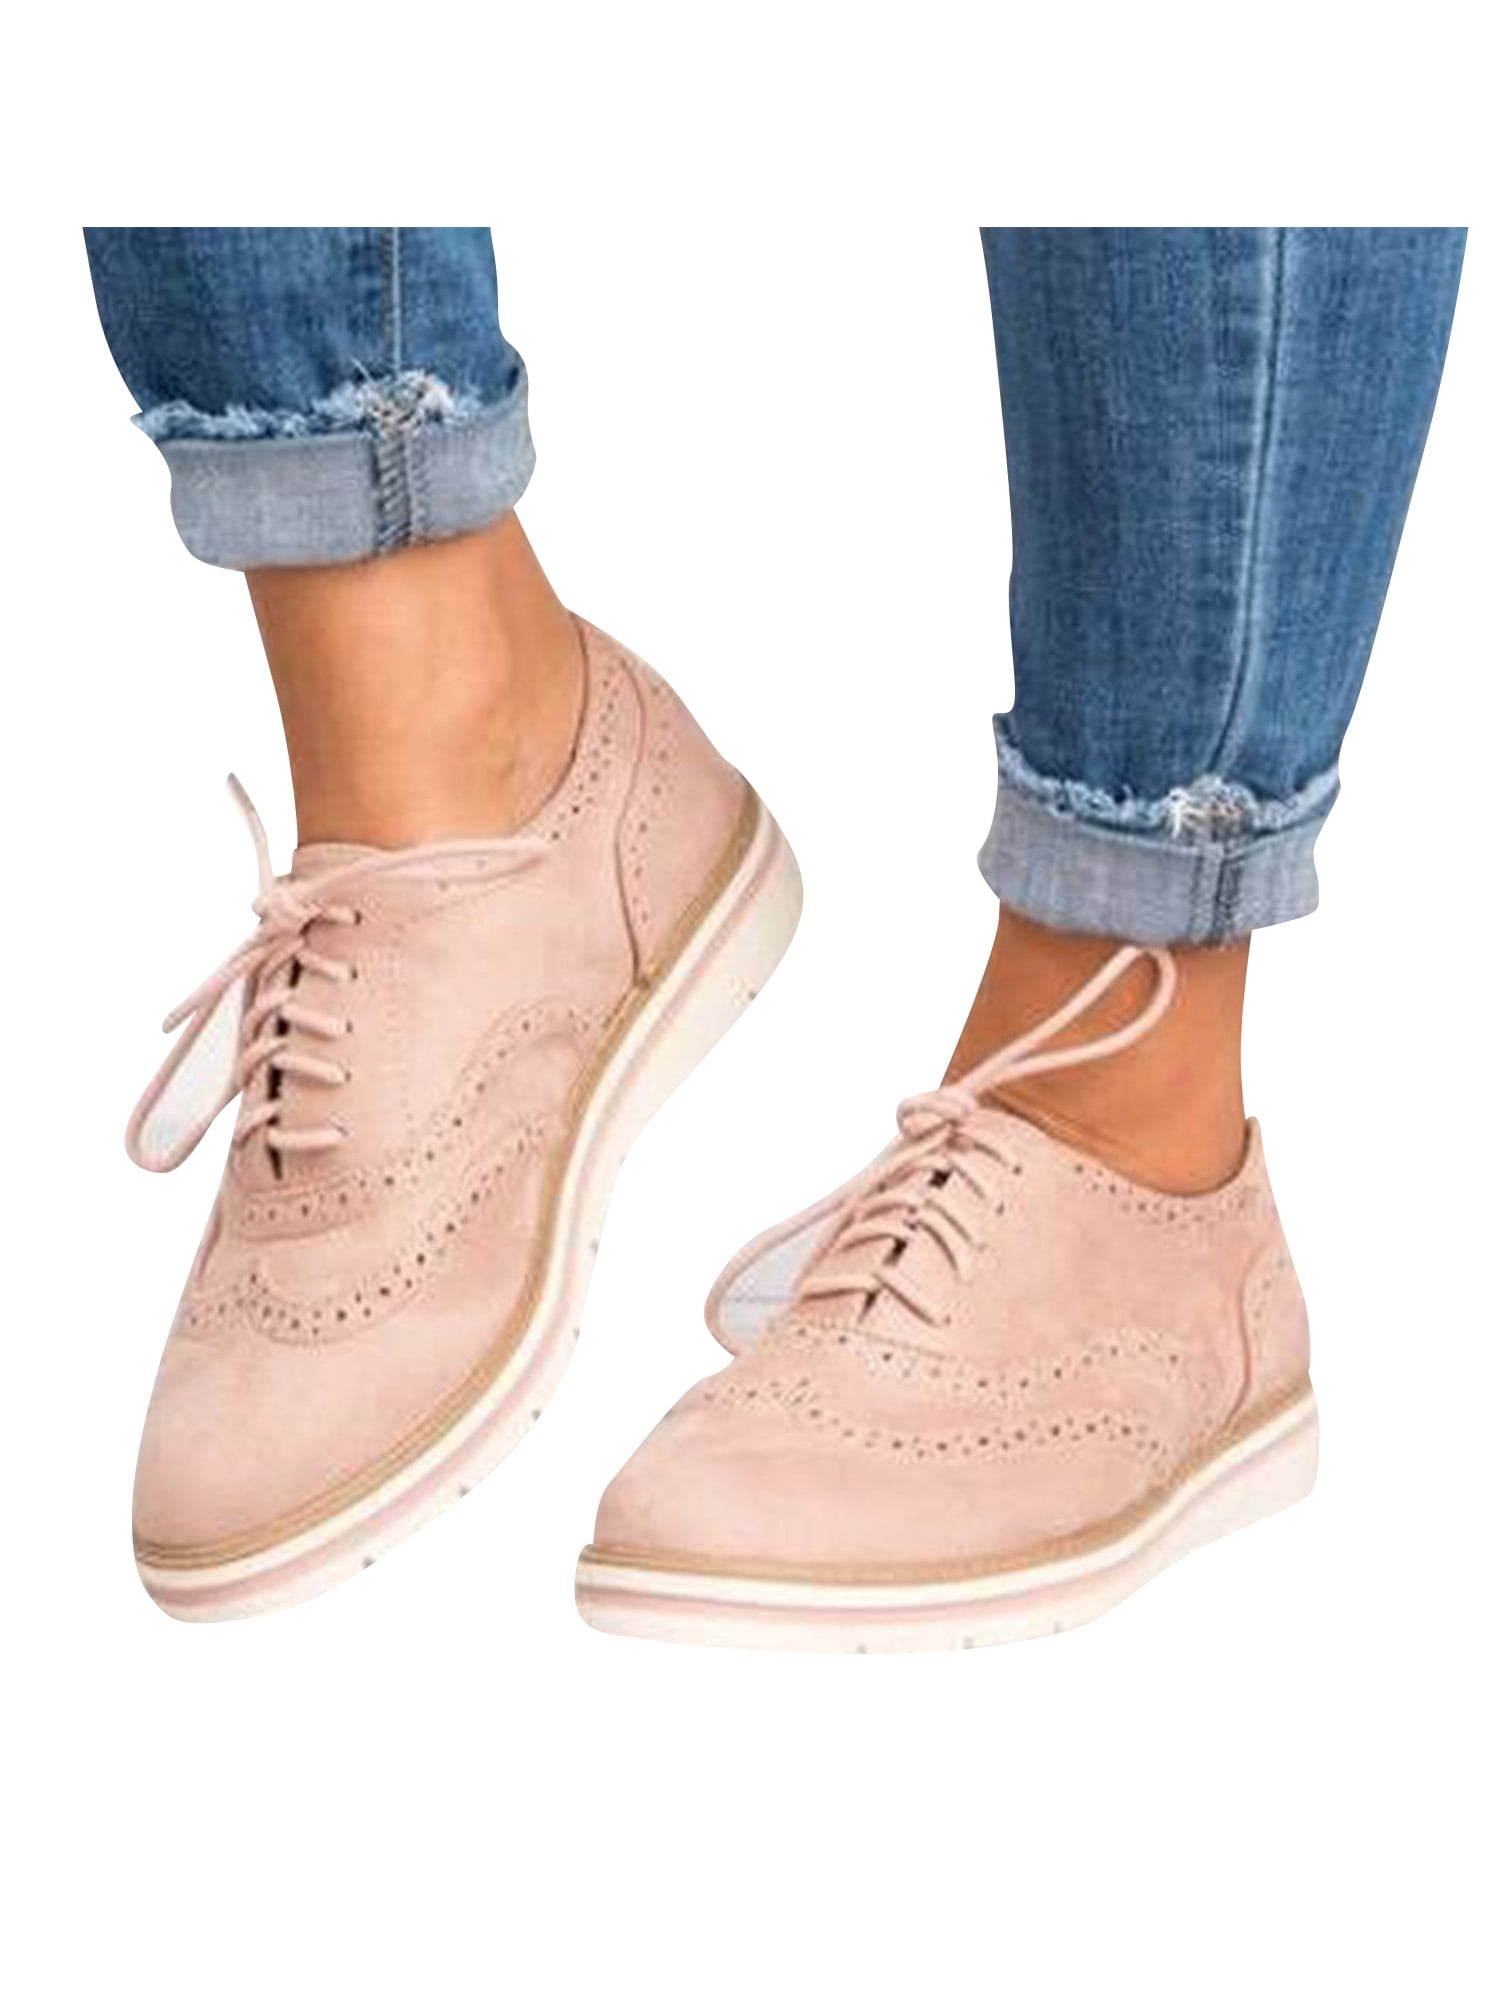 New Womens Casual Flatform Lace Up Trainers Glitter Creepers Comfy Shoes Sizes 